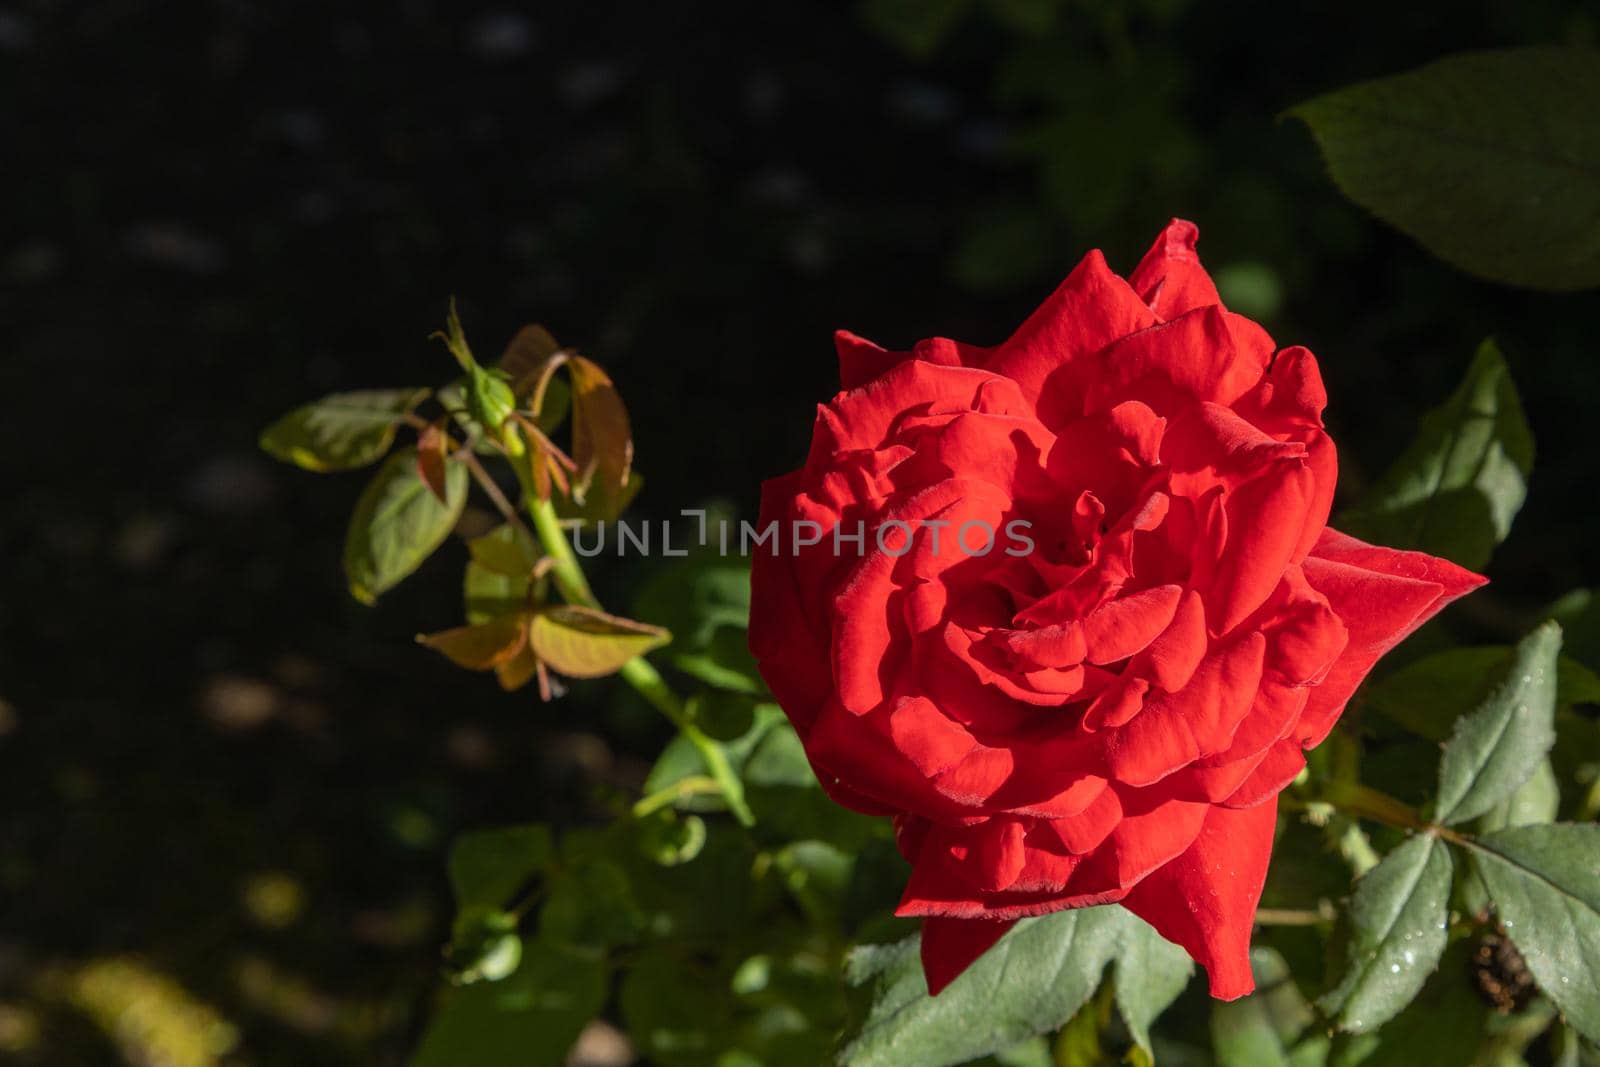 Close-up of beautiful red rose in the garden. High-quality photo